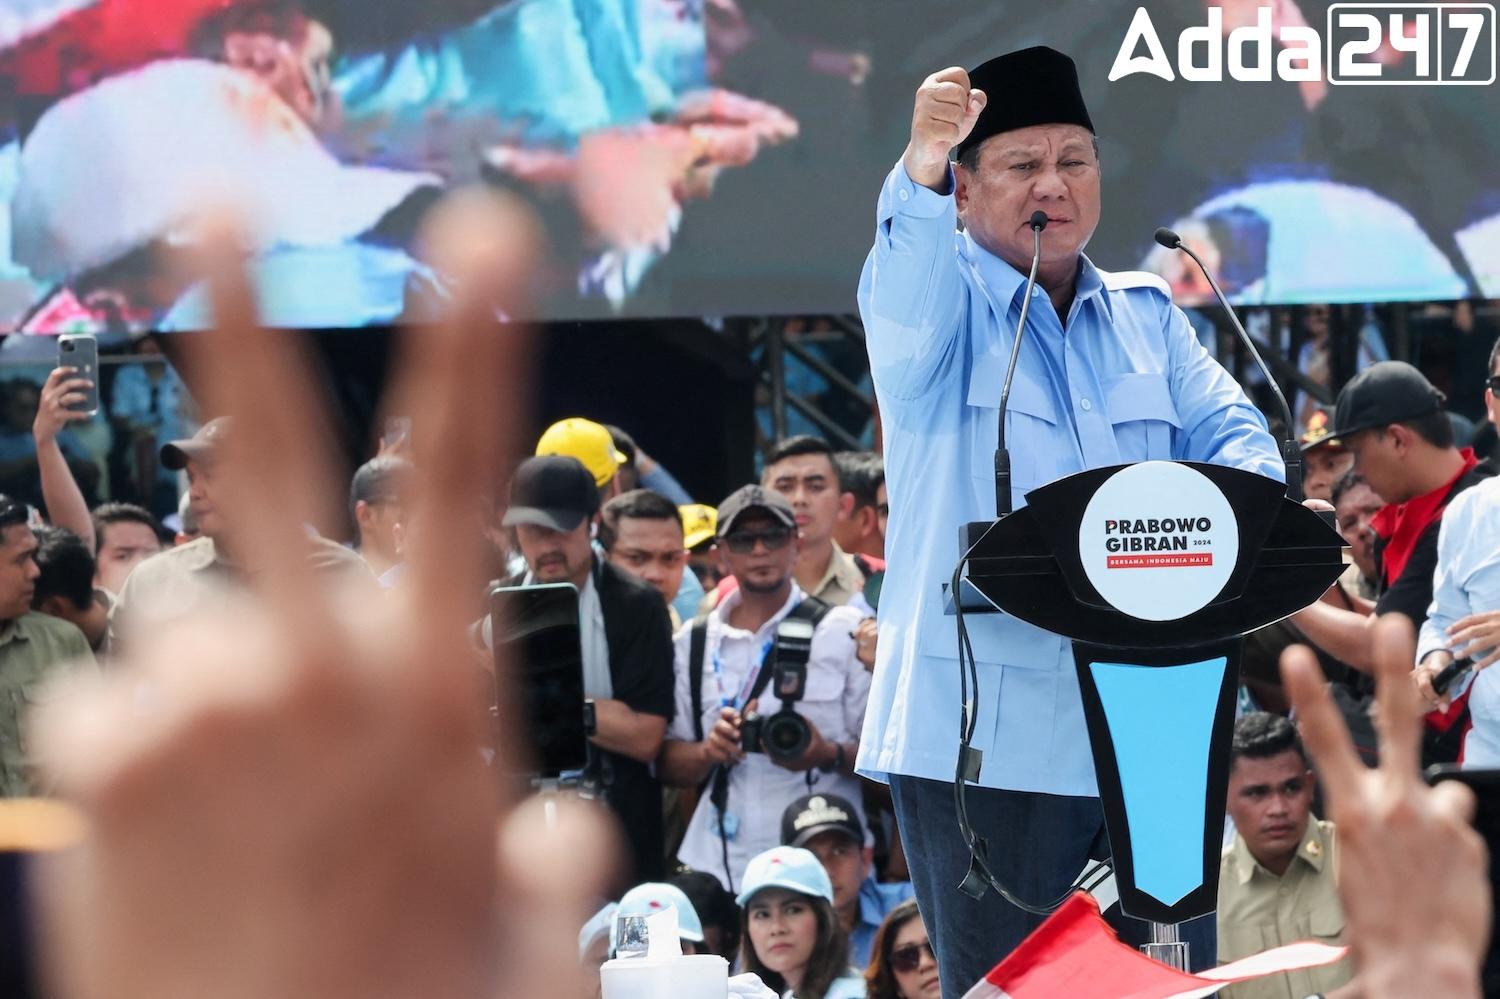 Prabowo Subianto Wins Indonesian Presidency: A Decisive Victory